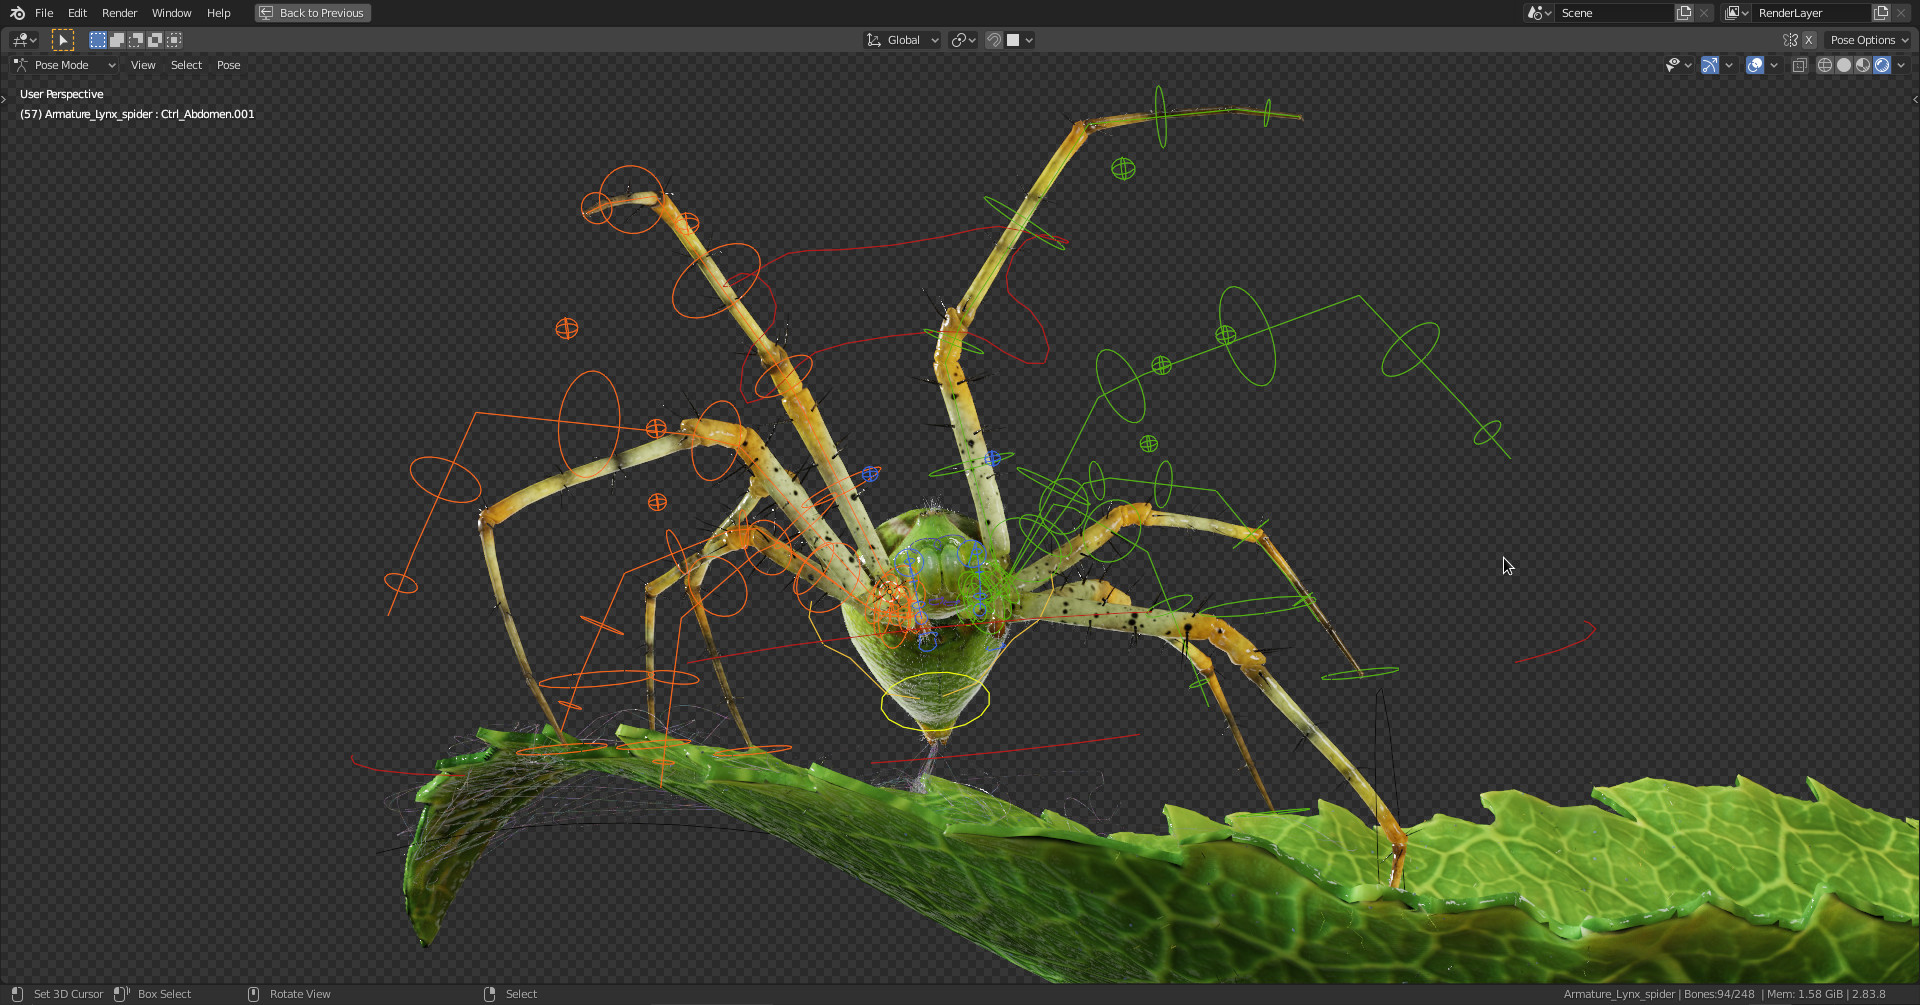 images/graphisme-3d/animaux/lynx_spider